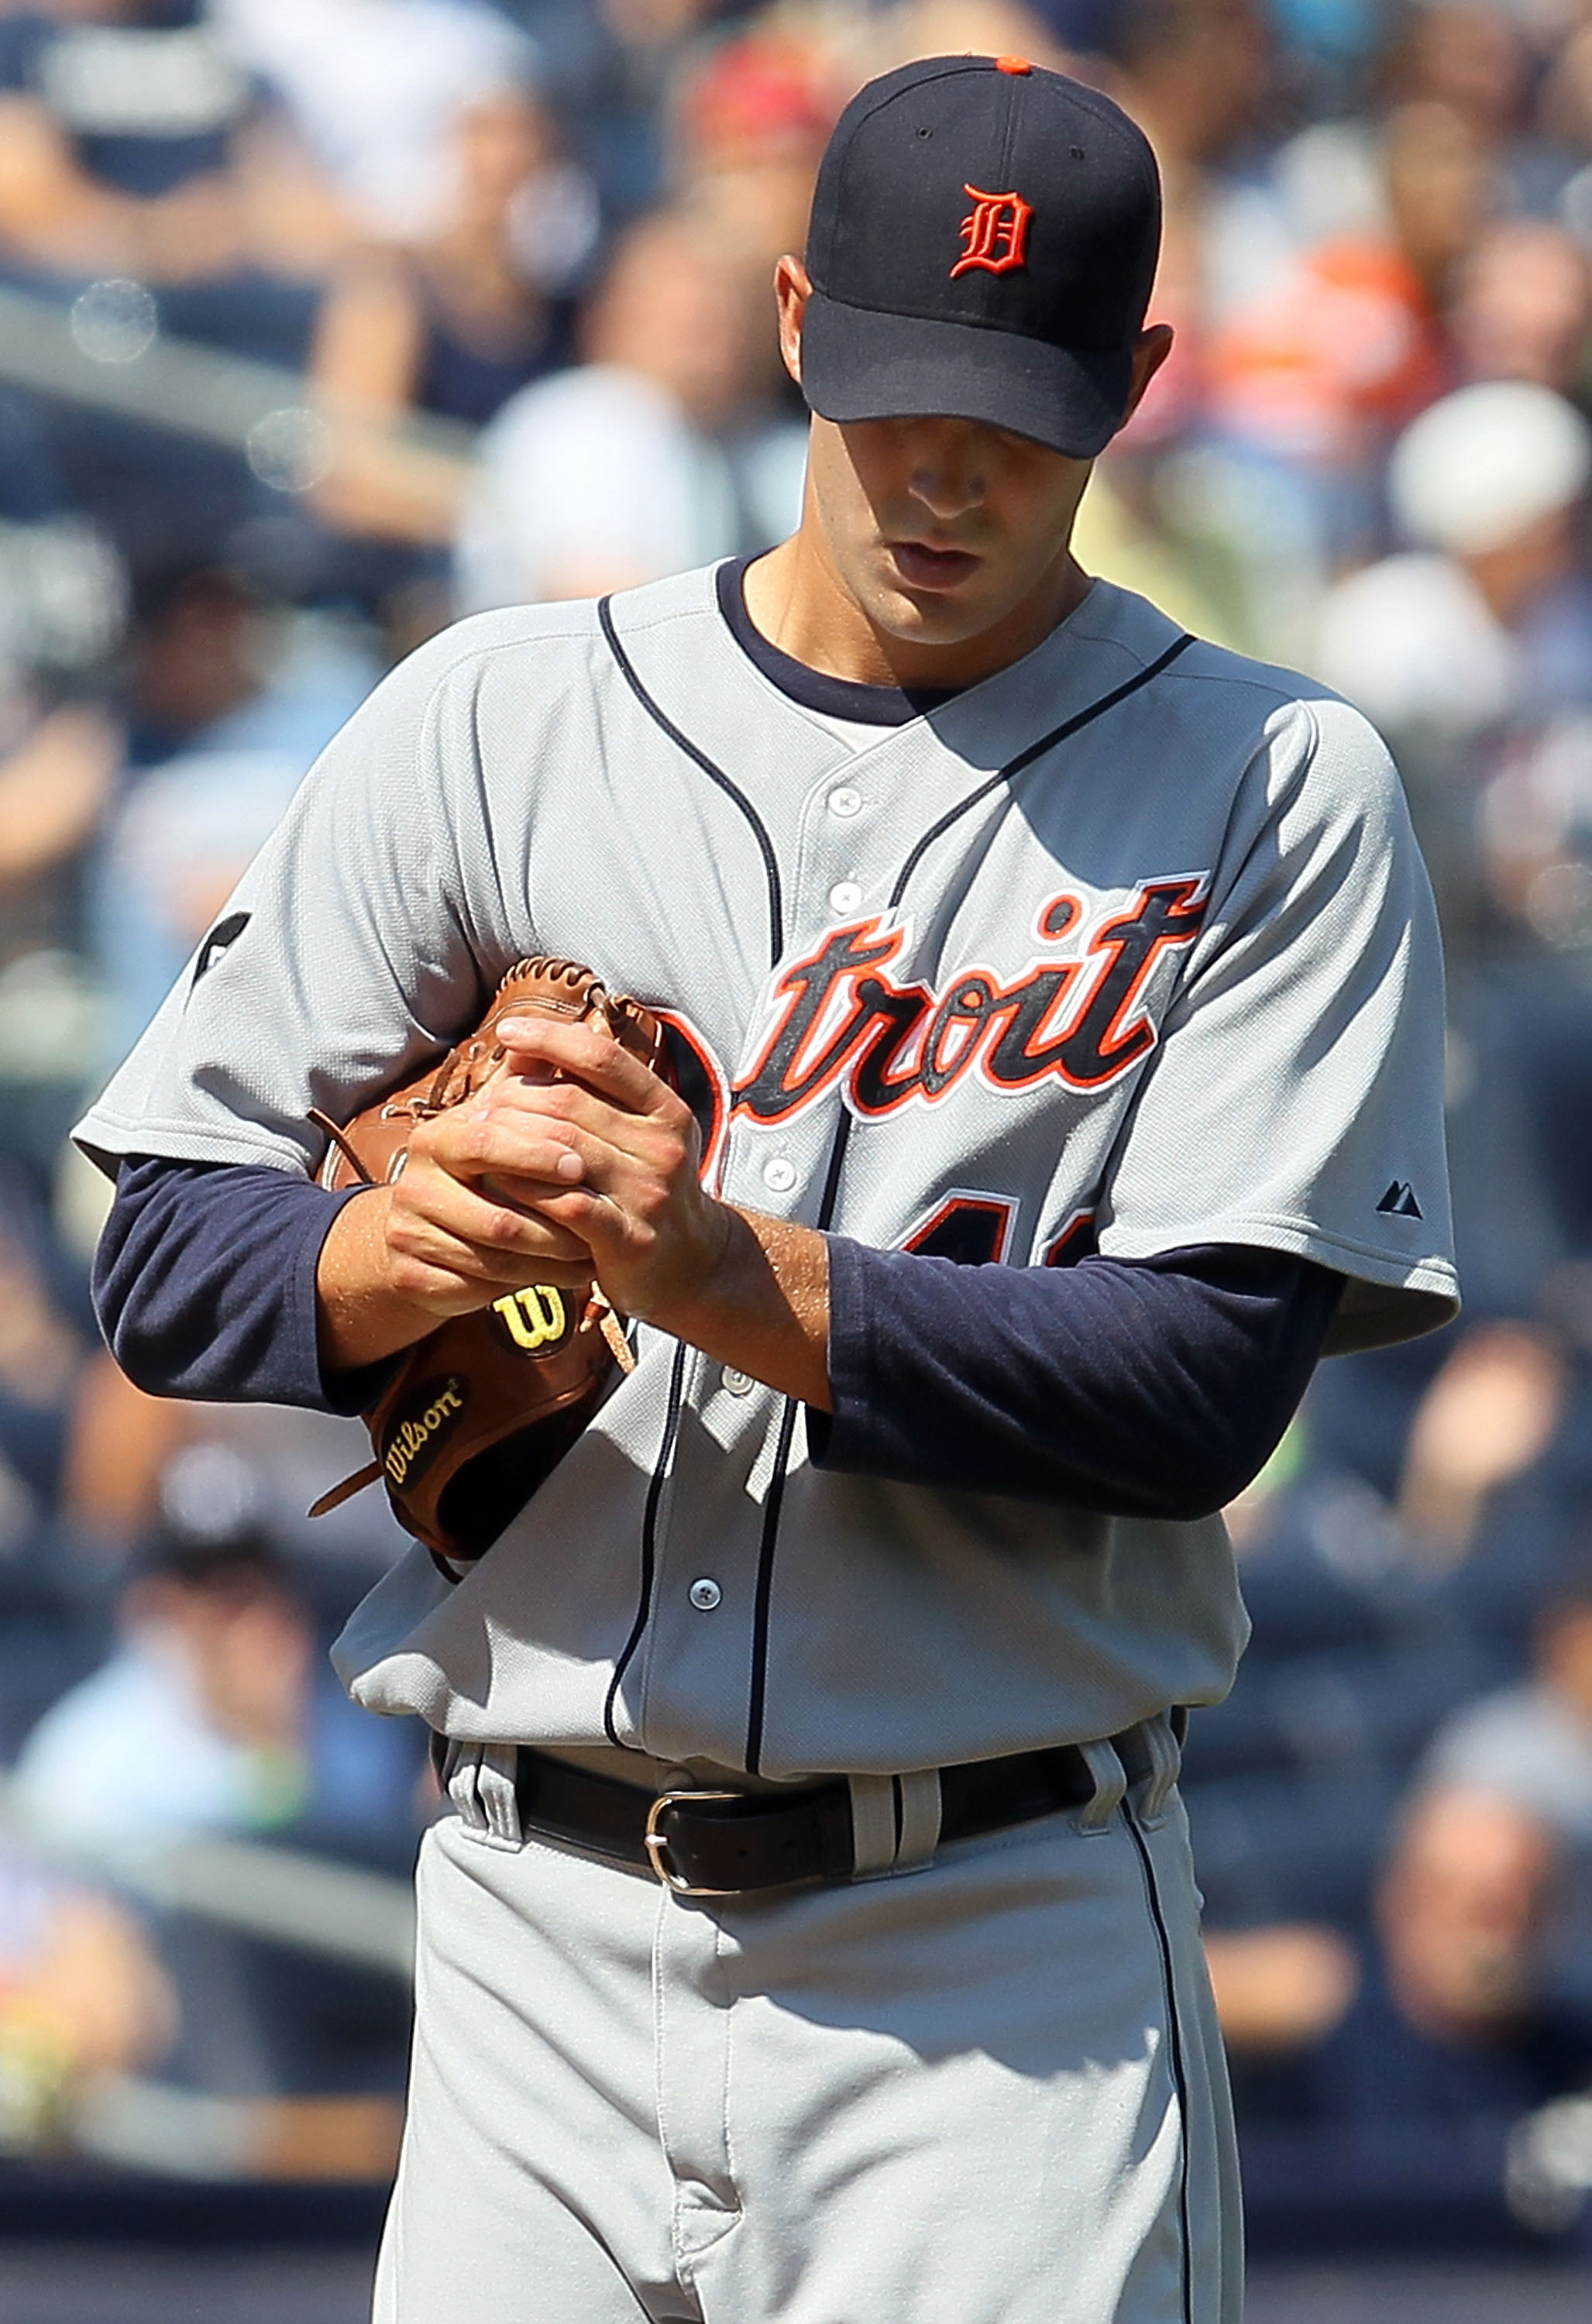 NEW YORK - AUGUST 19:  Rick Porcello #48 of the Detroit Tigers looks on during the sixth inning against the New York Yankees on August 19, 2010 at Yankee Stadium in the Bronx borough of New York City.  (Photo by Jim McIsaac/Getty Images)